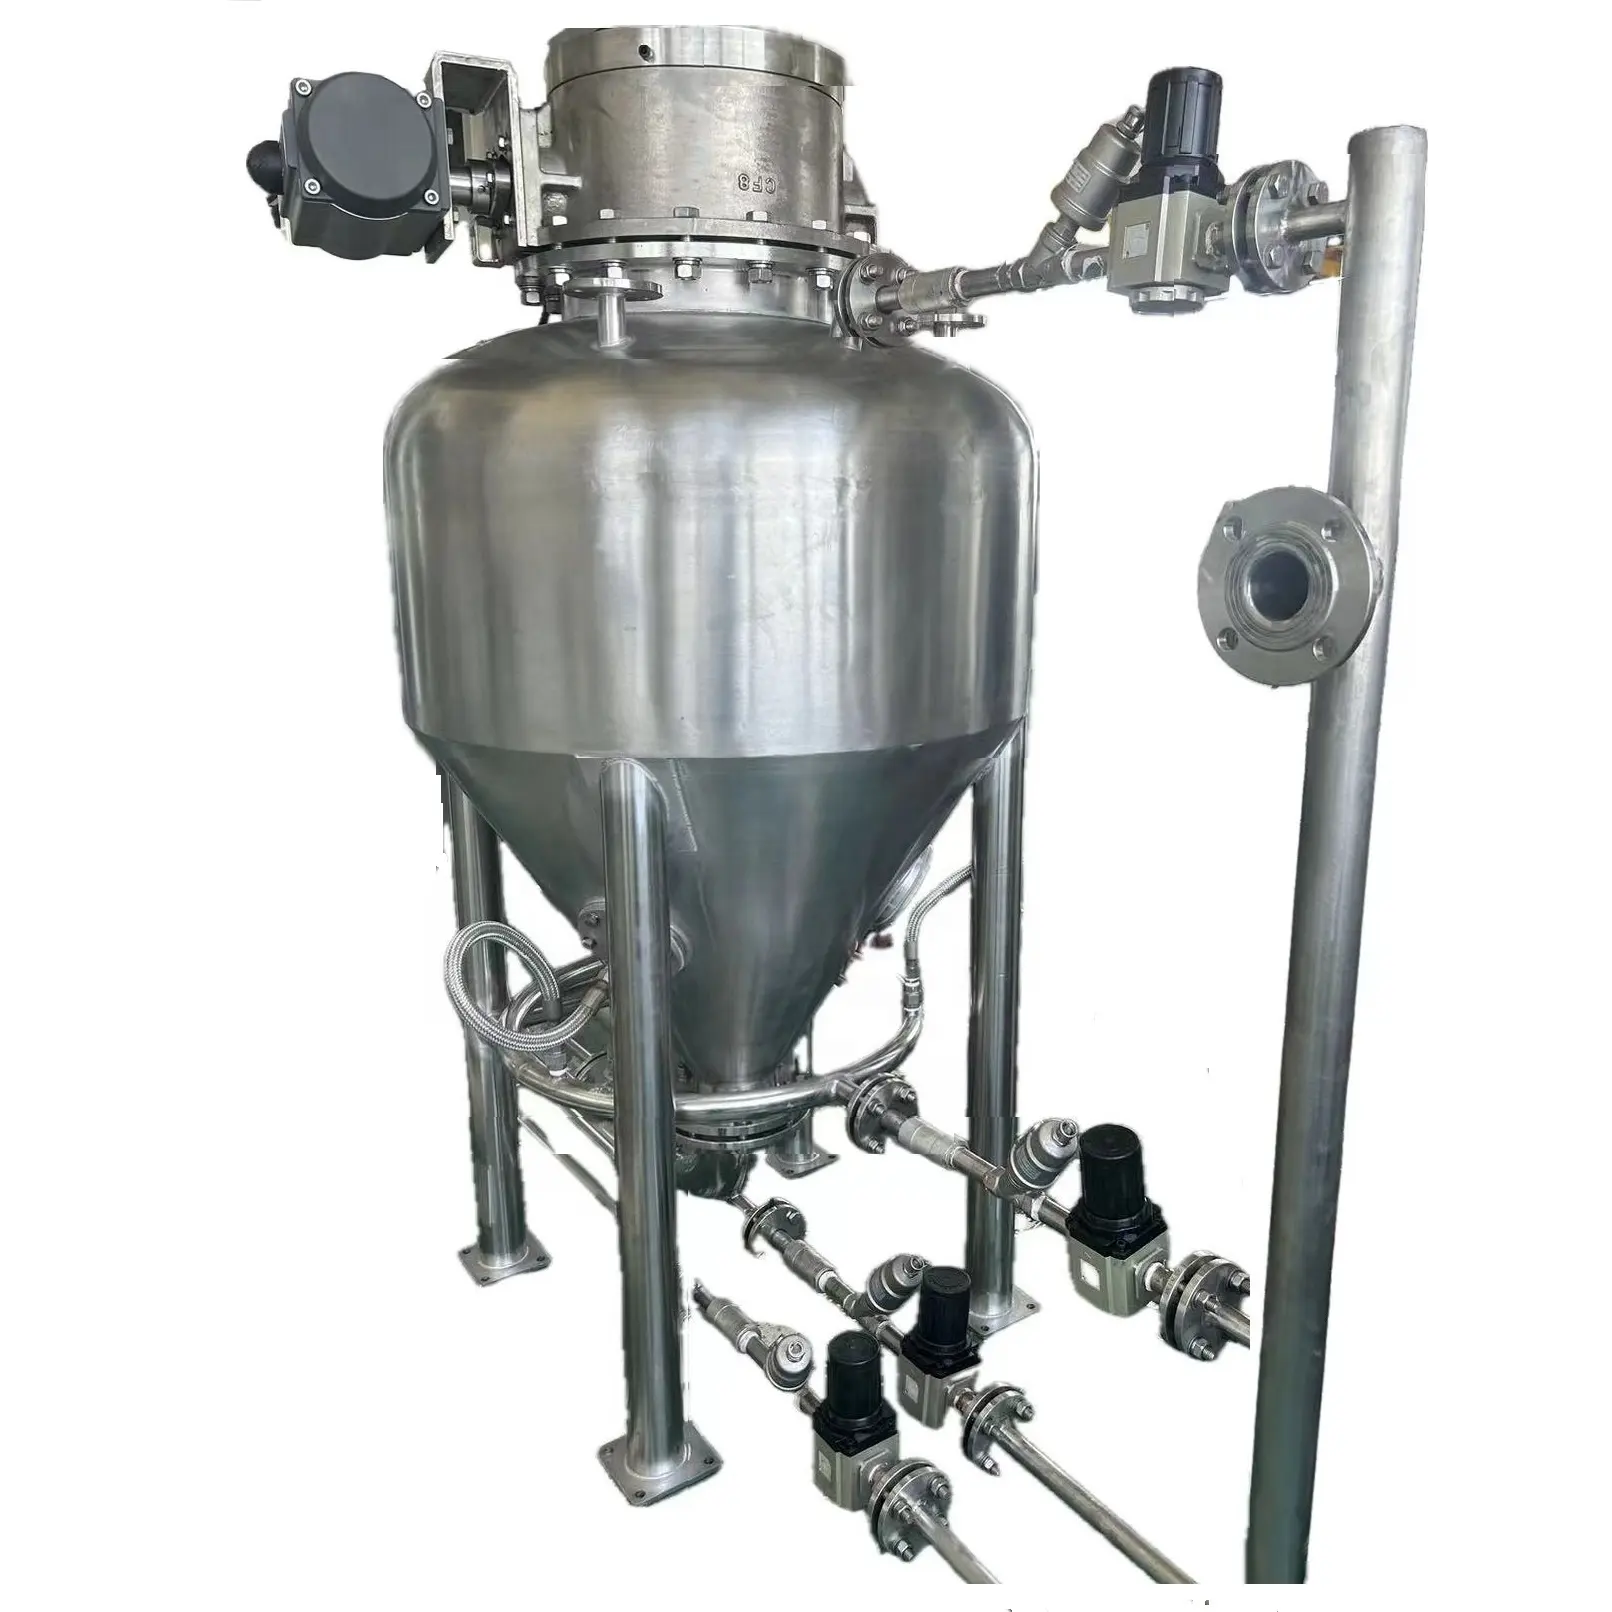 Reliable Efficient Dense Phase Pneumatic Positive Pressure Conveyors For Cocoa milk Cement powder Dry Fly Ash